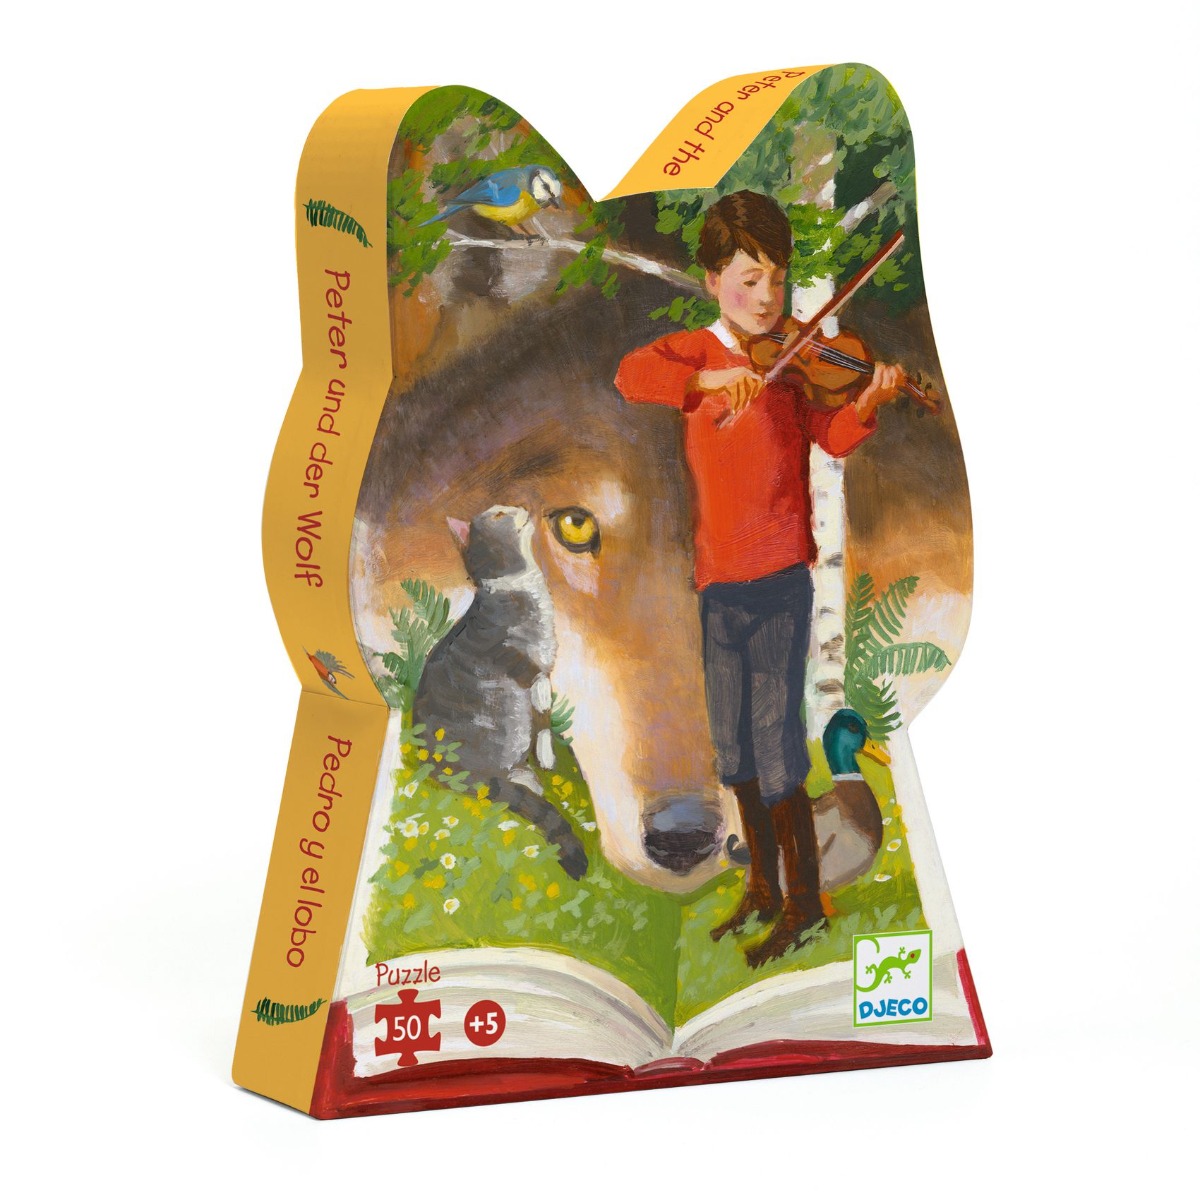 Peter and the Wolf 50 piece puzzle (Age +5)